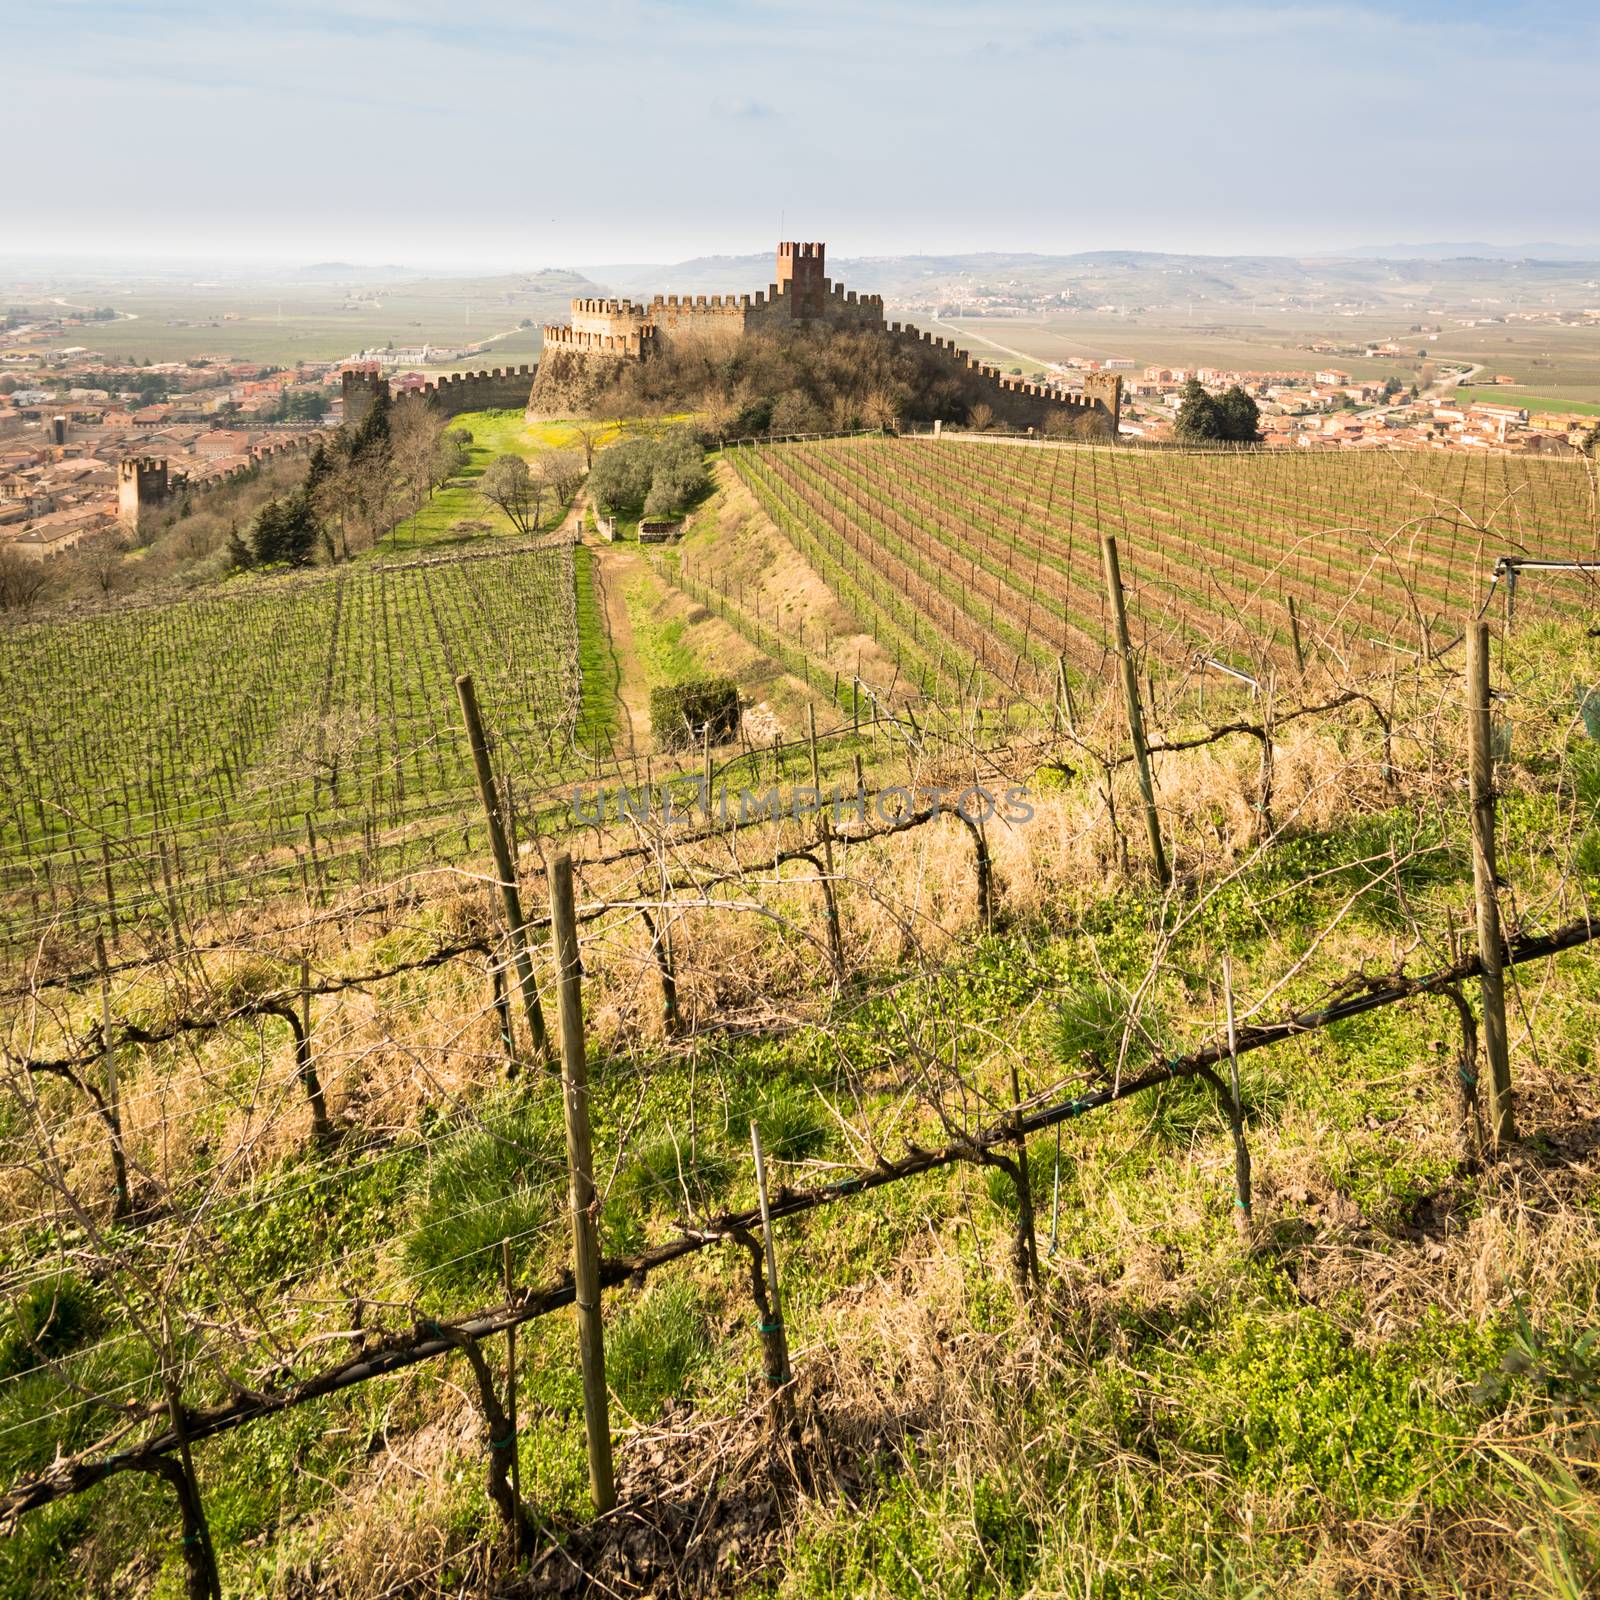 View of Soave (Italy) and its famous medieval castle. by Isaac74